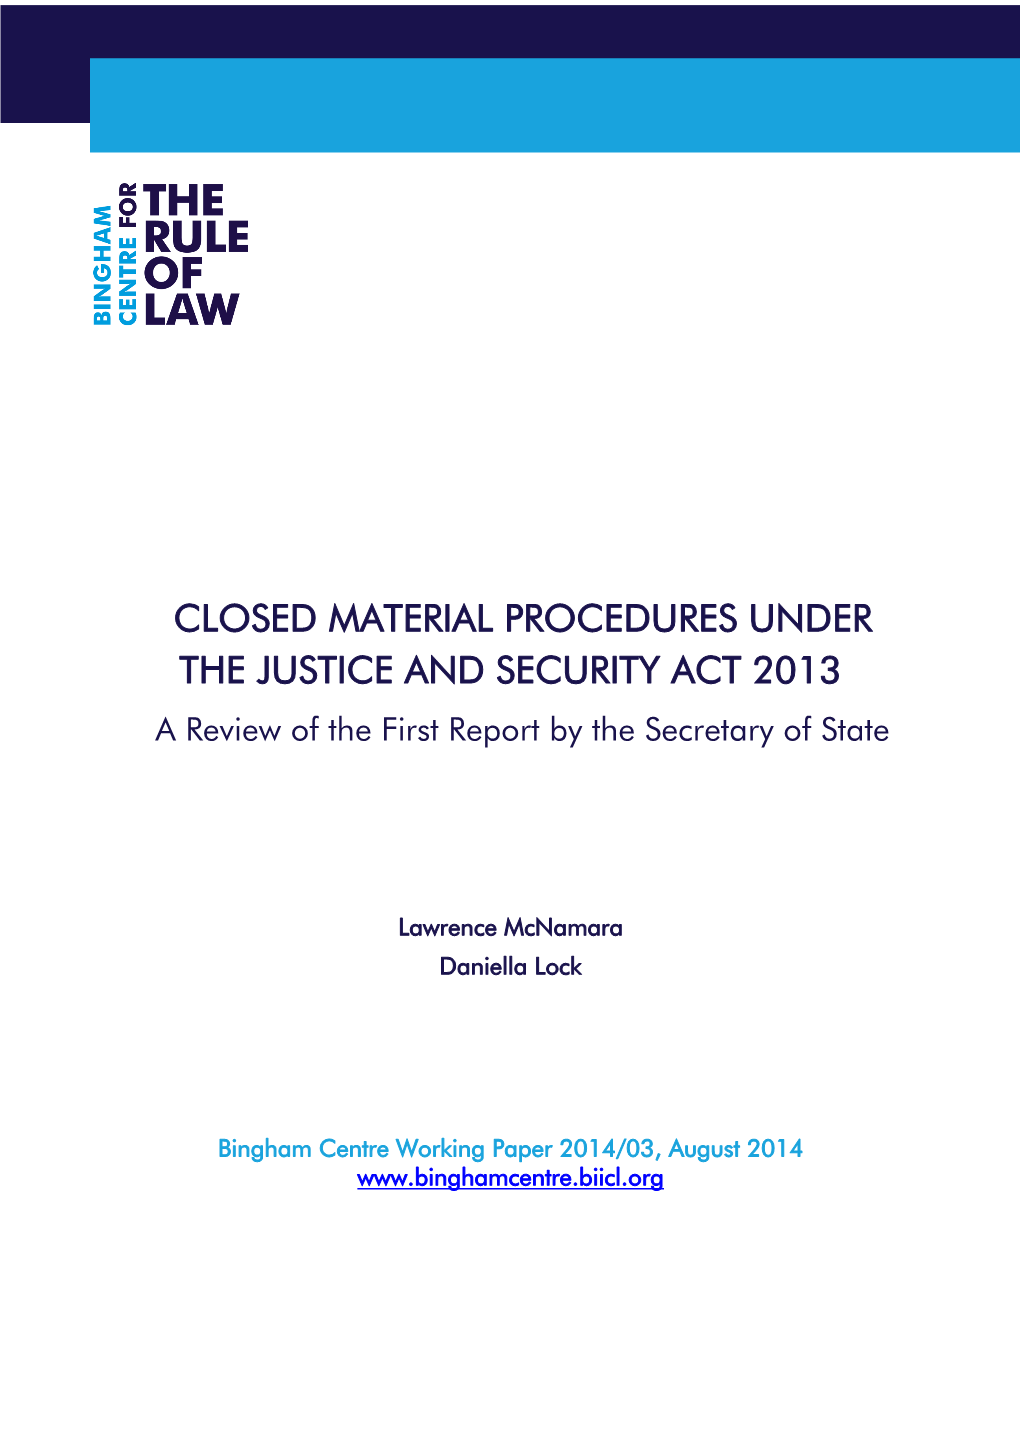 CLOSED MATERIAL PROCEDURES UNDER the JUSTICE and SECURITY ACT 2013 a Review of the First Report by the Secretary of State